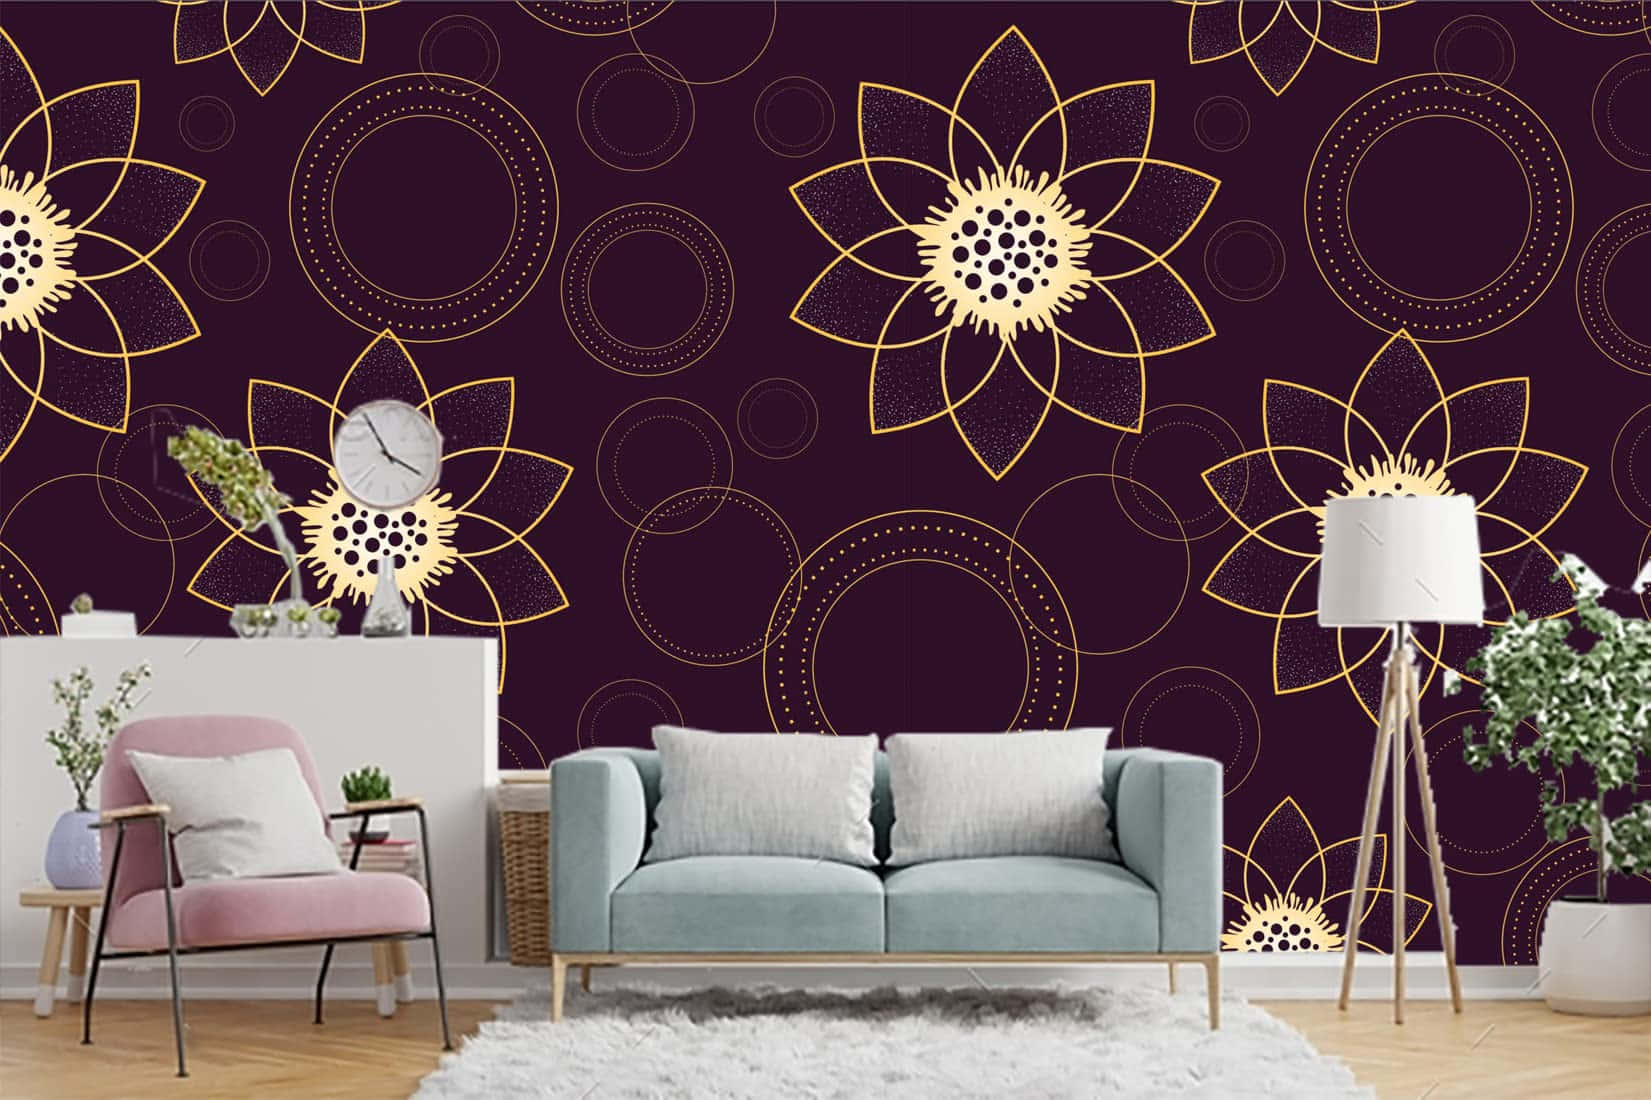 Transform your living space with the perfect home decor pieces Wallpaper